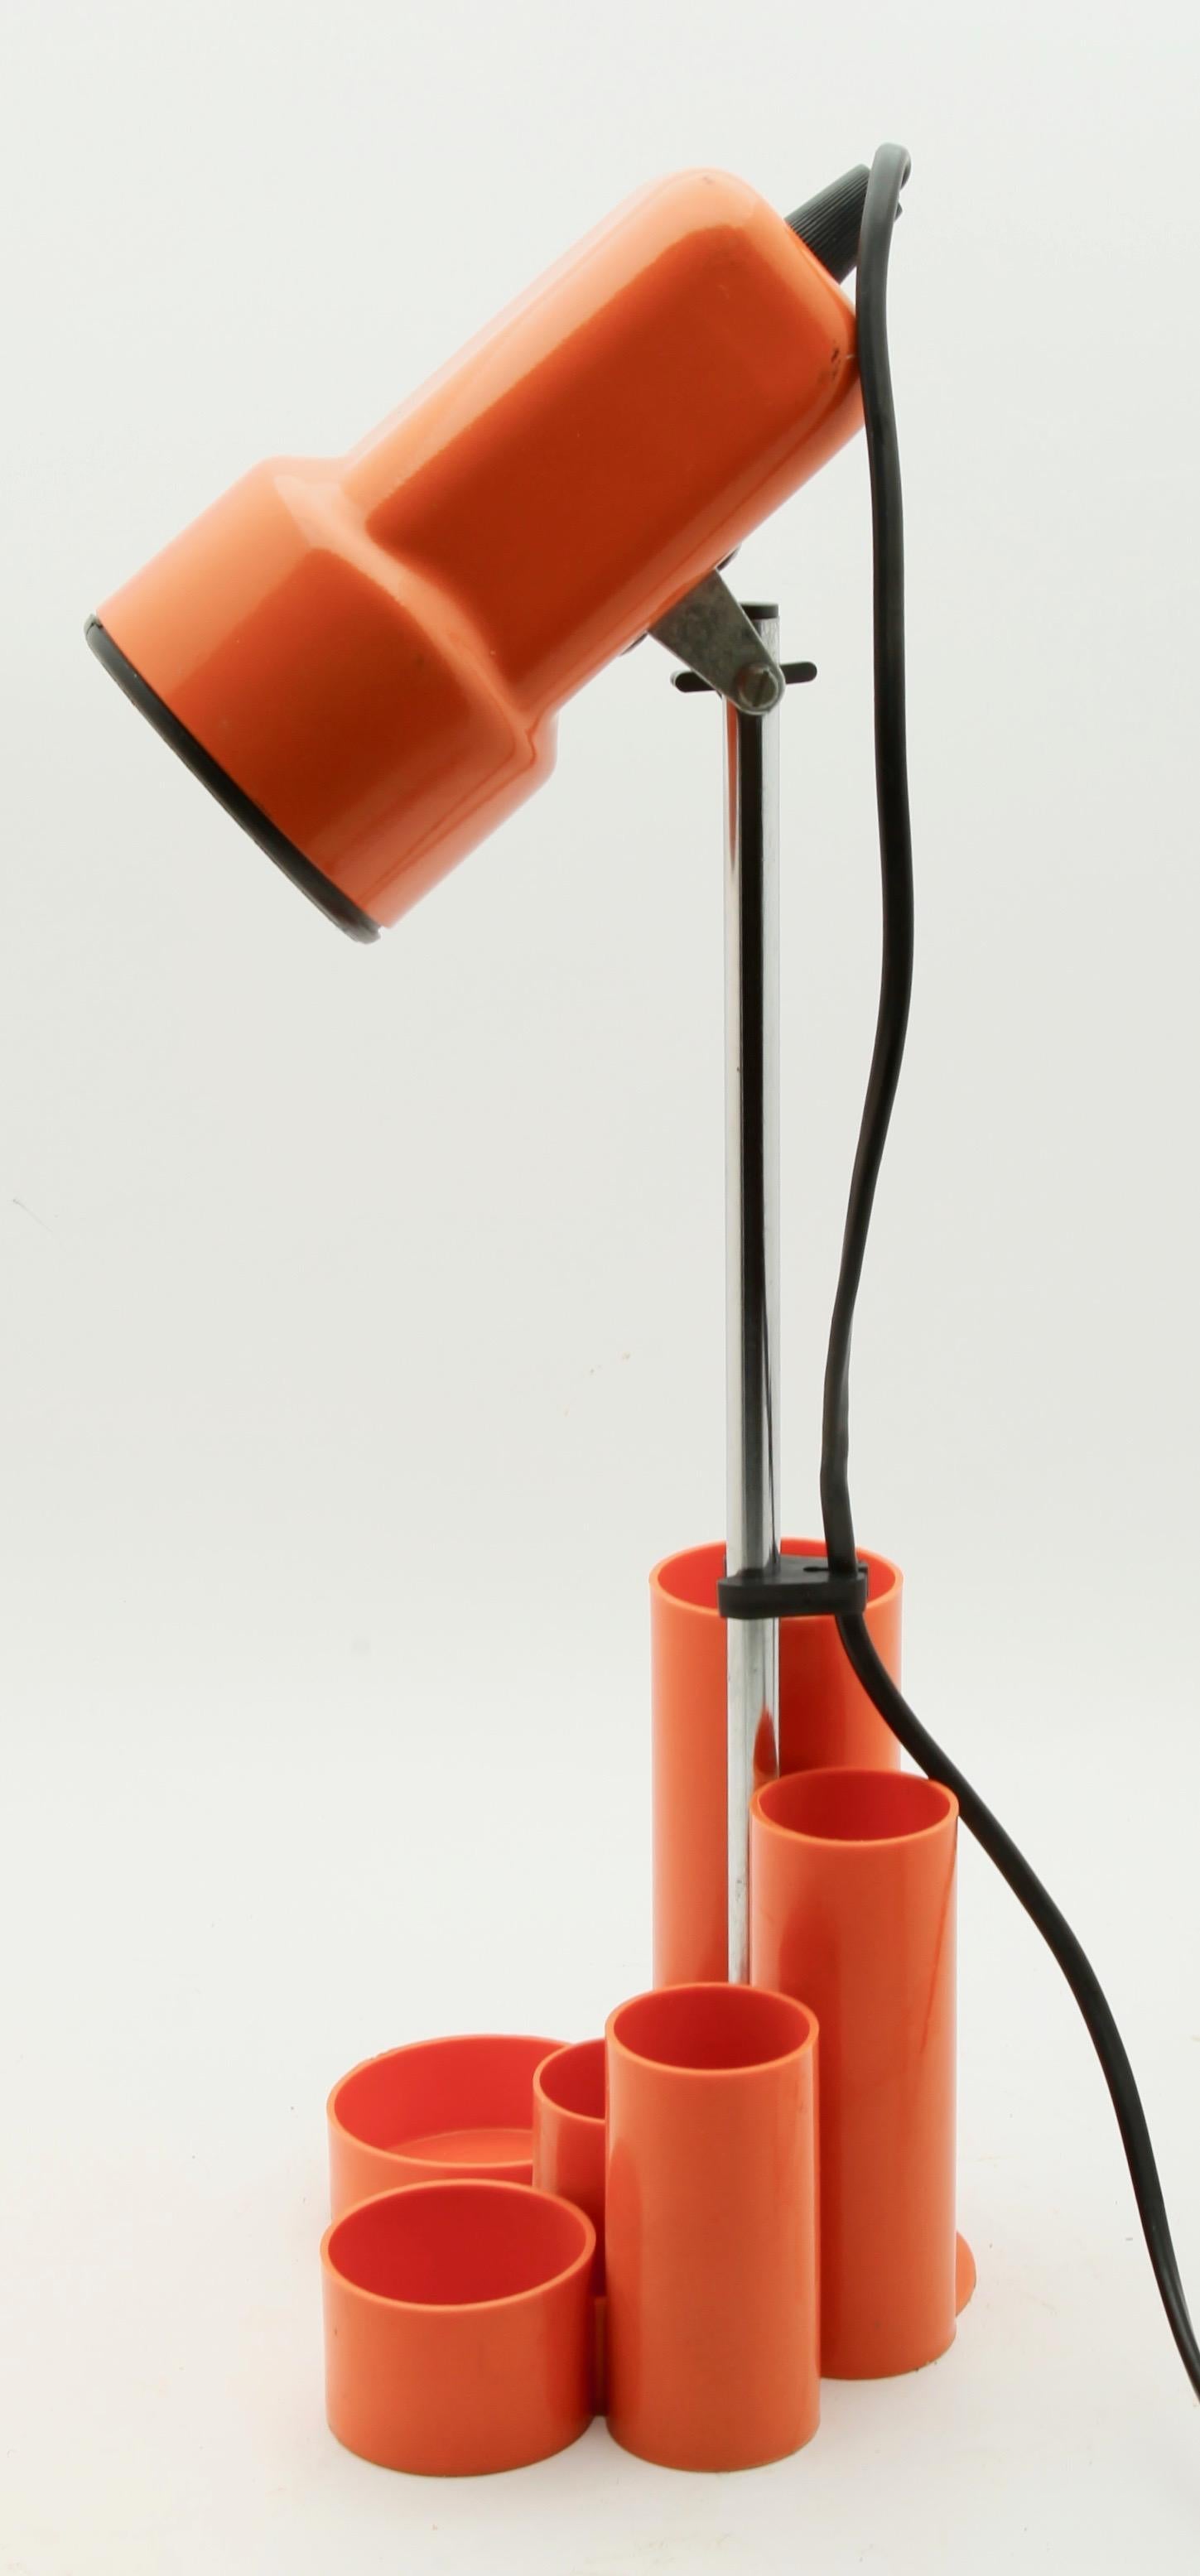 A bright and simple desk-tidy provides the base for a small spotlight, ensuring maximum functionality in minimum space. Typical of the 1960s it's funky orange color gives your desk a hit of period color.
There is space for pens and small items in